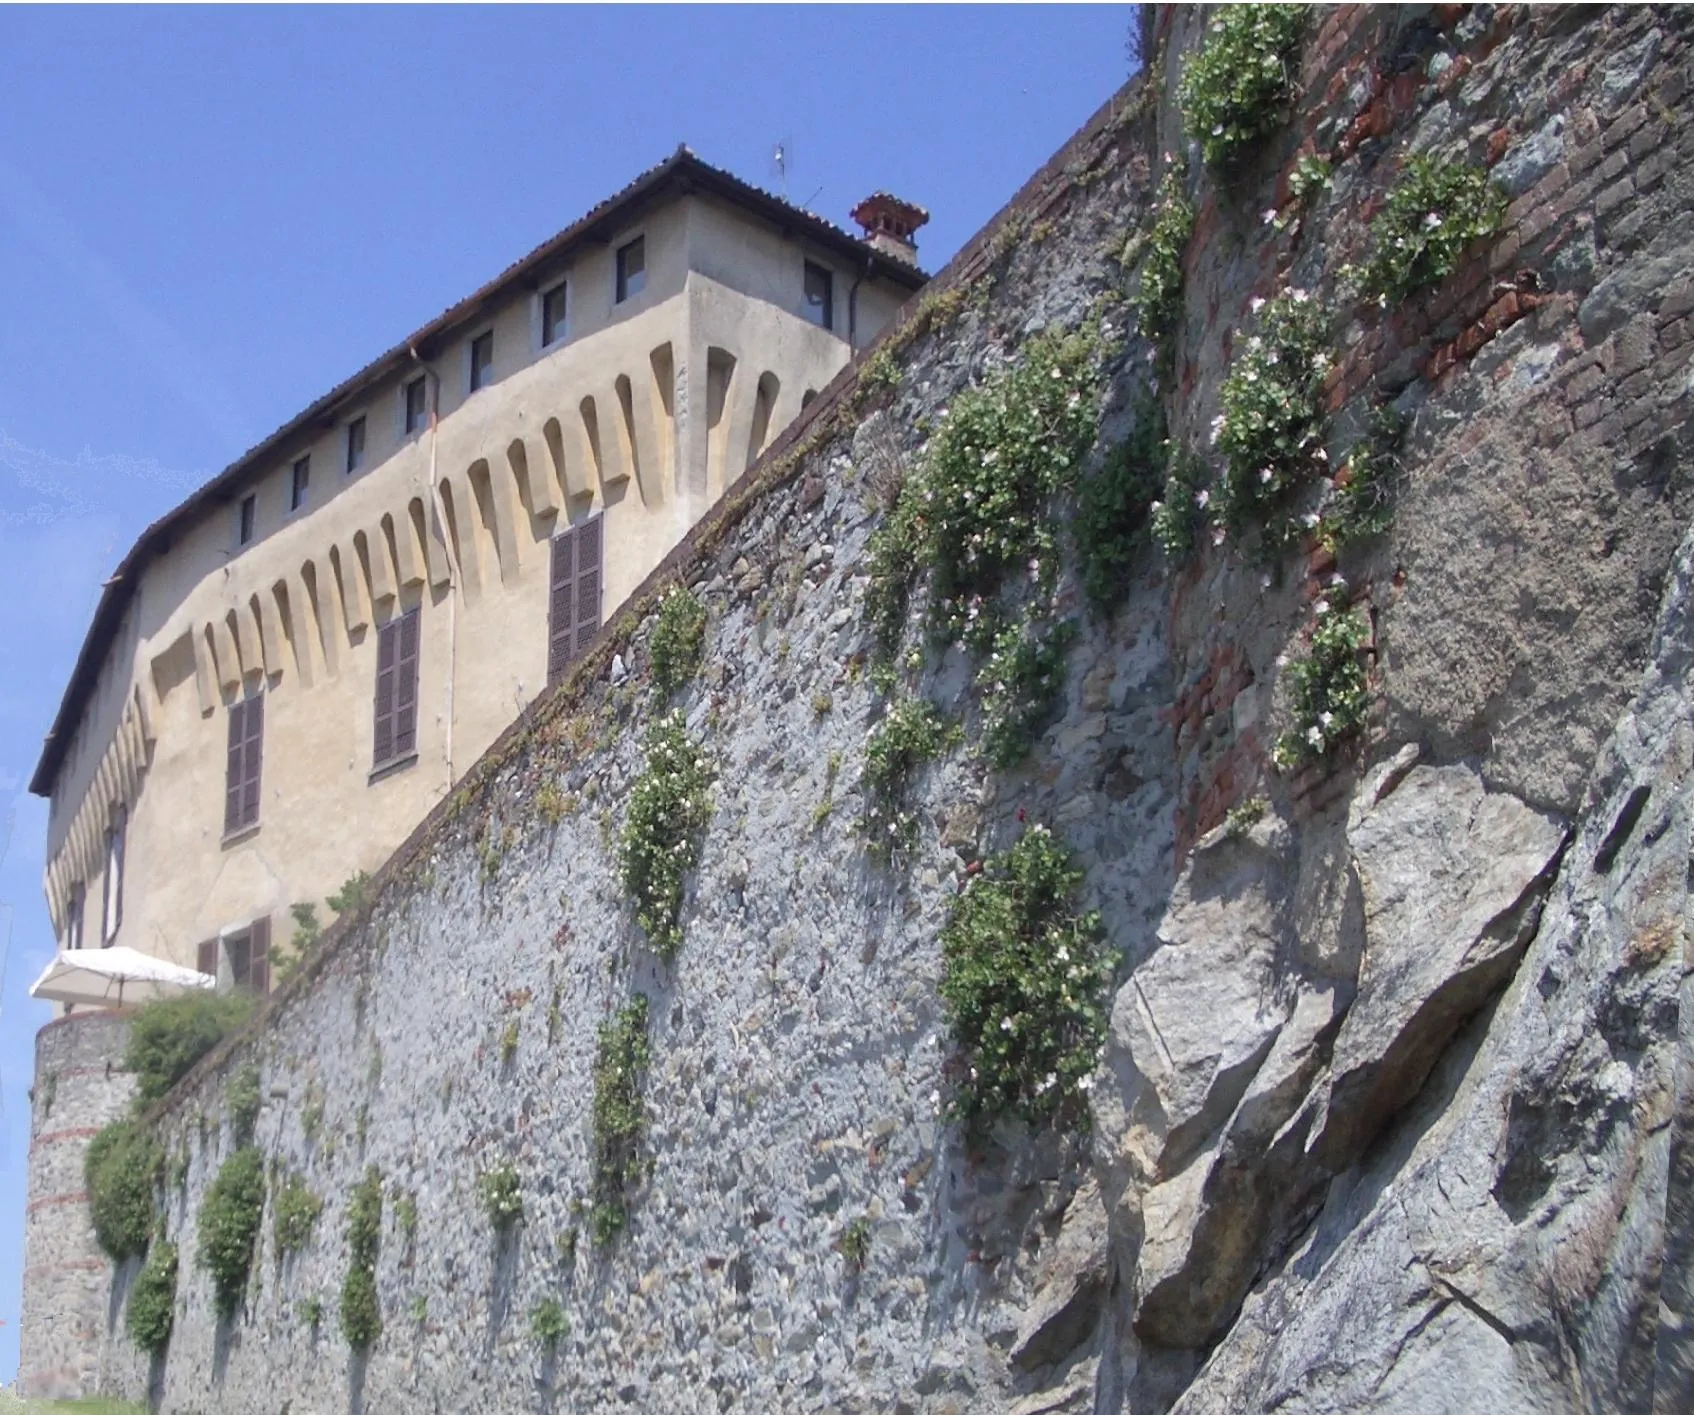 Photo showing: The medieval castle, Roppolo, Province of Biella, Italy